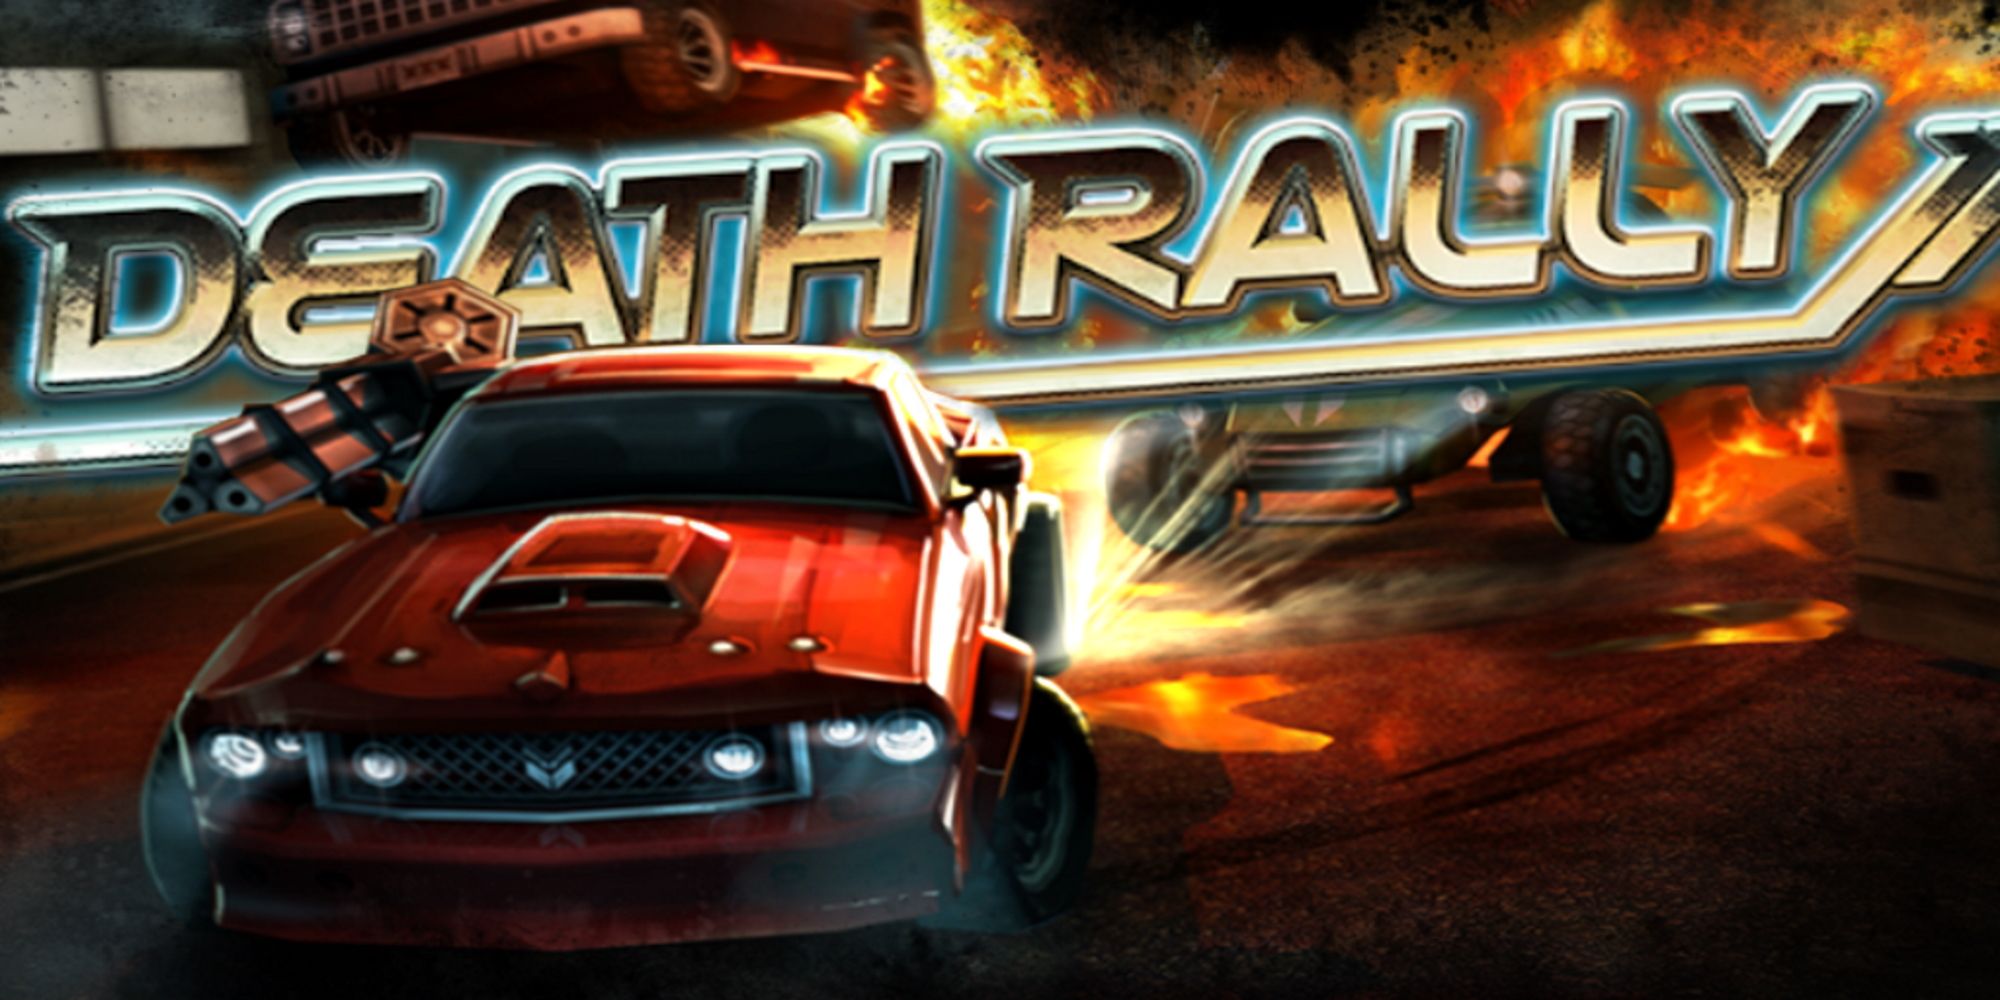 Cover art for the Death Rally Remake first released in 2011, with a red car having a minigun and the logo in the background.